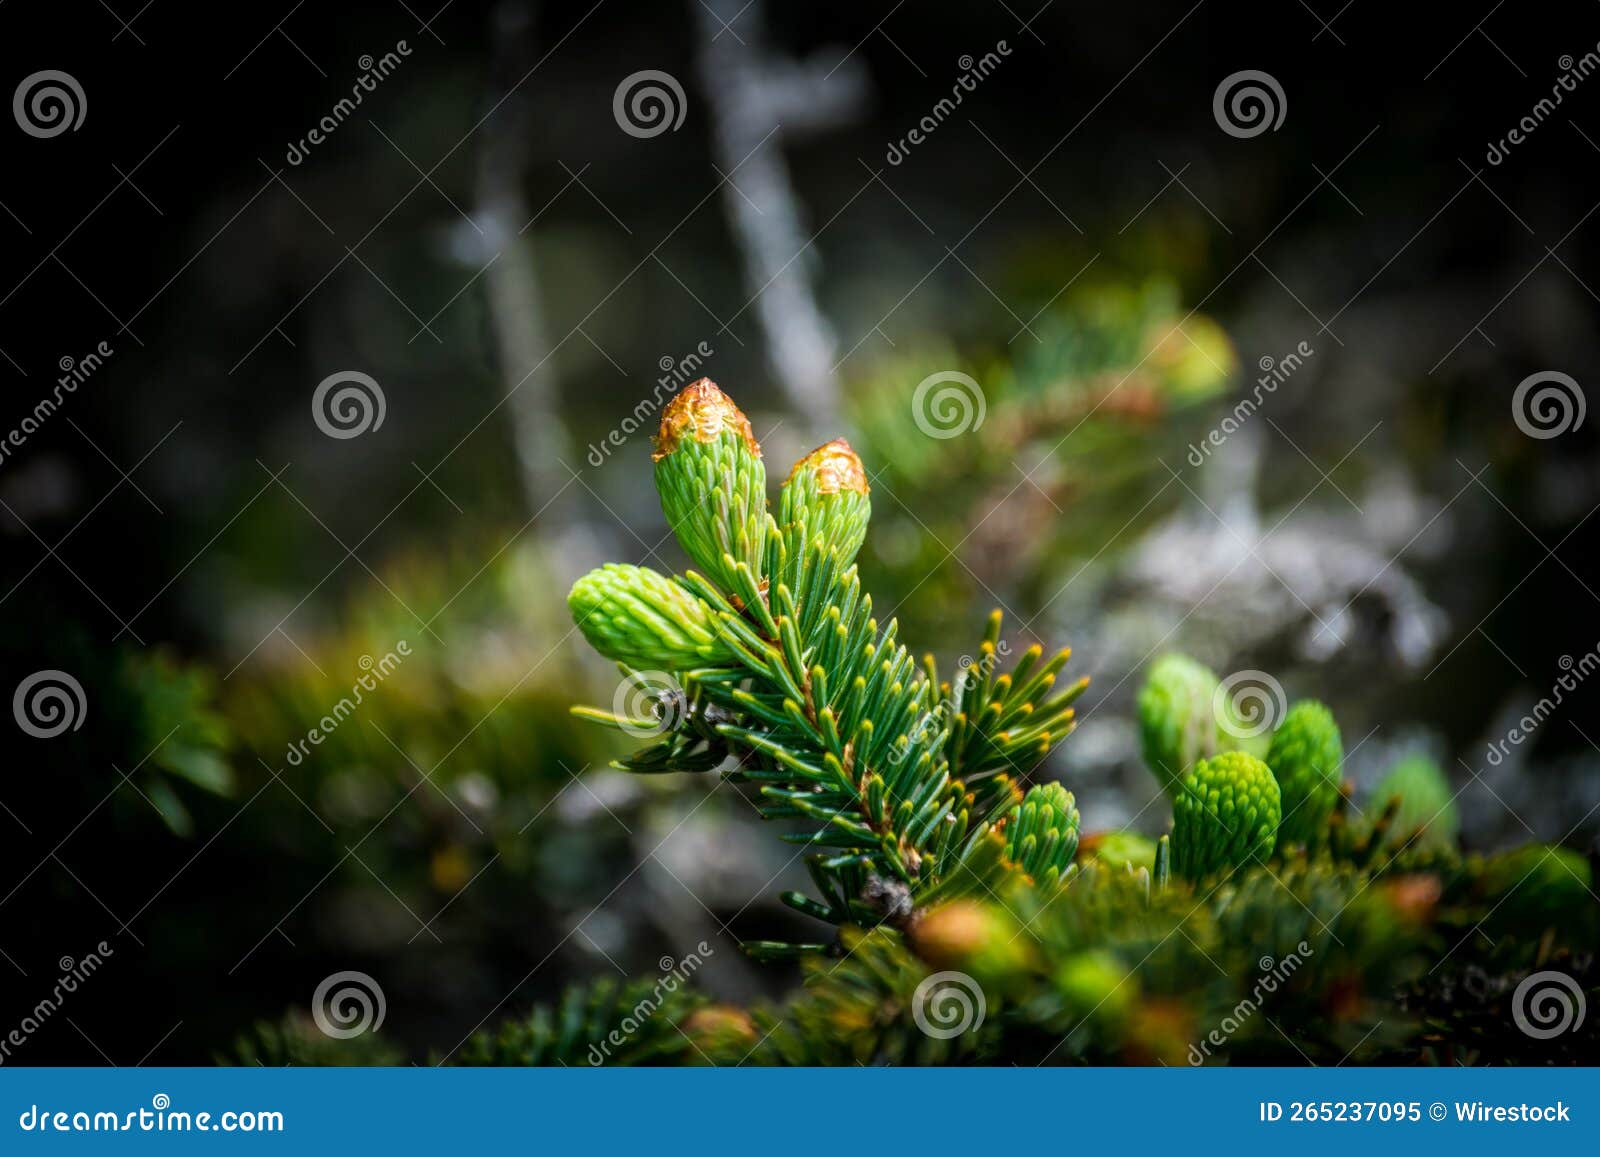 selective focus of abies firma on a blurry background